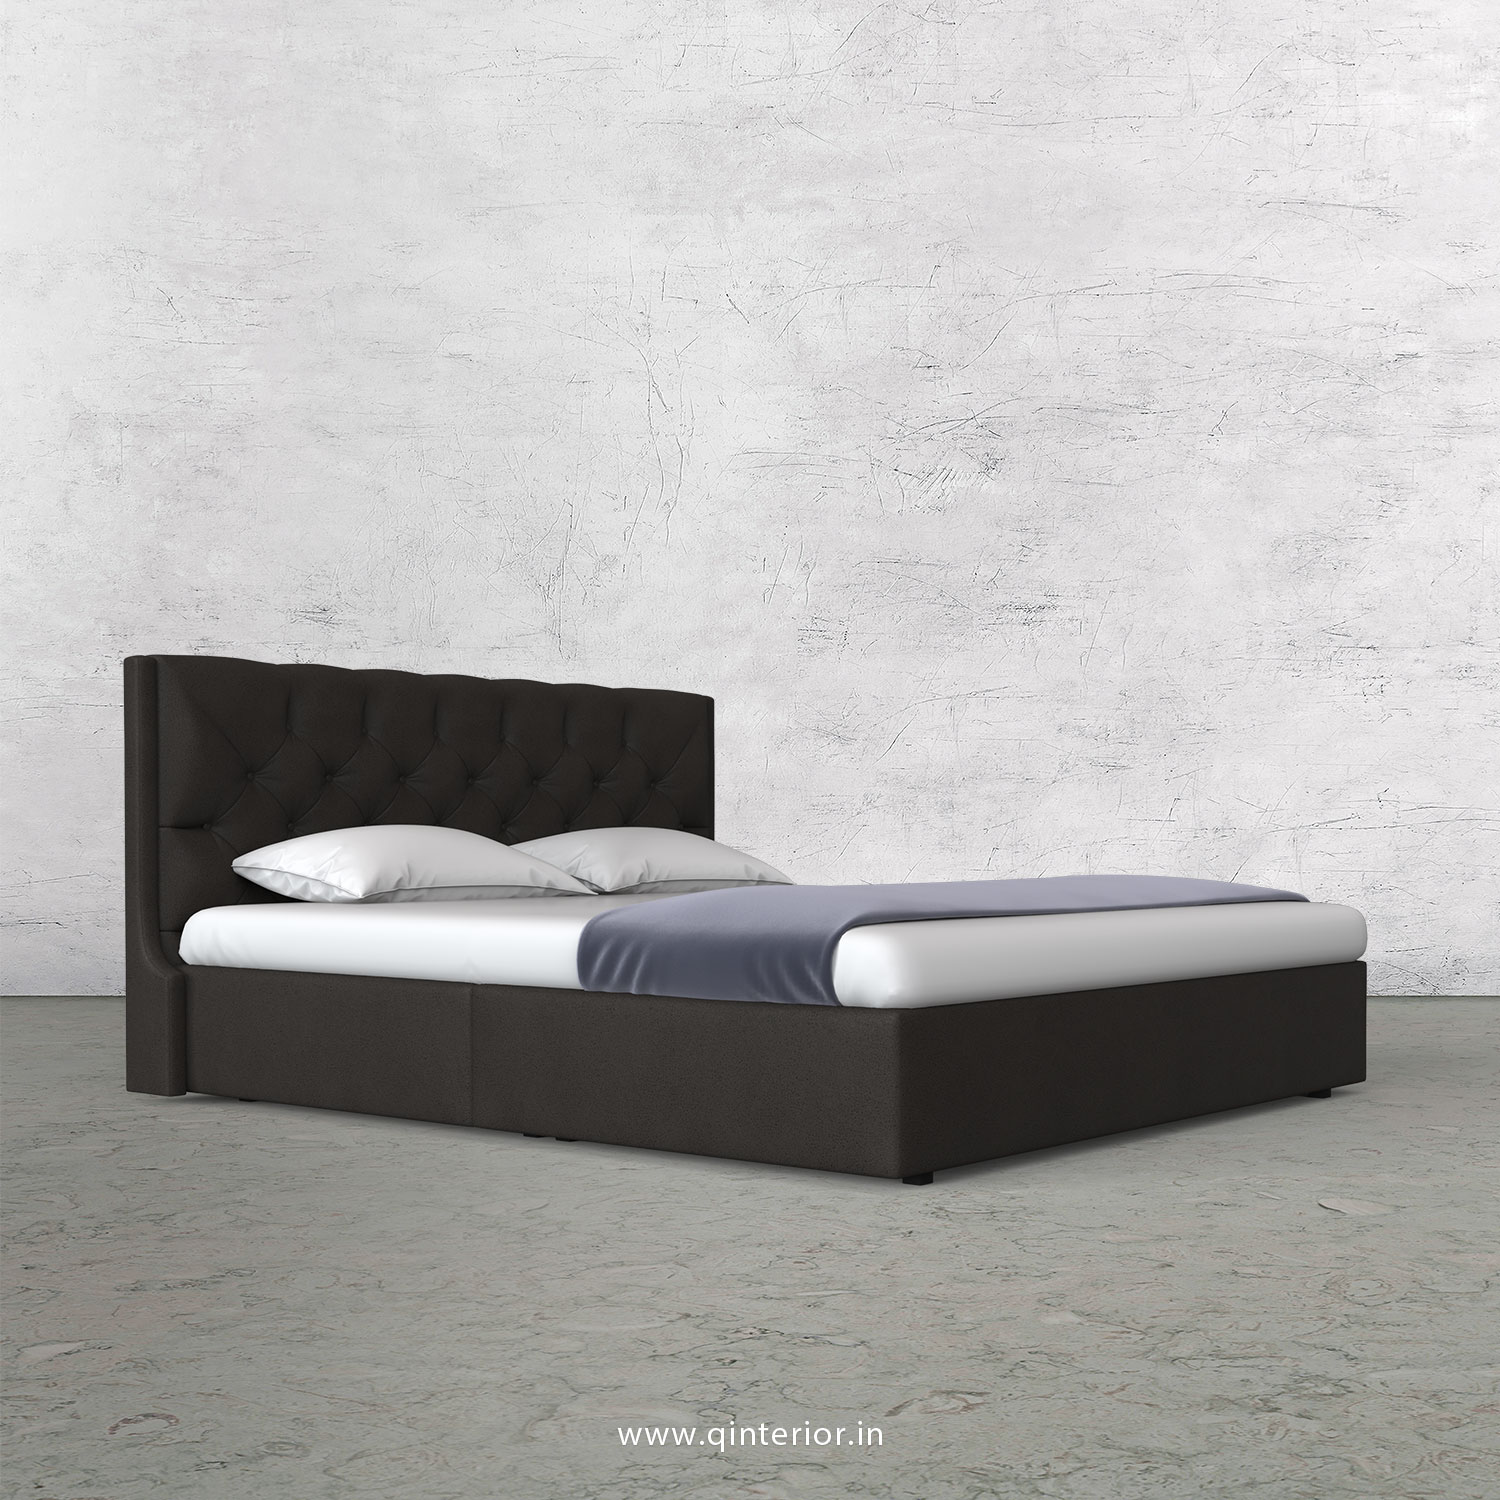 Scorpius King Size Bed in Fab Leather Fabric - KBD009 FL15